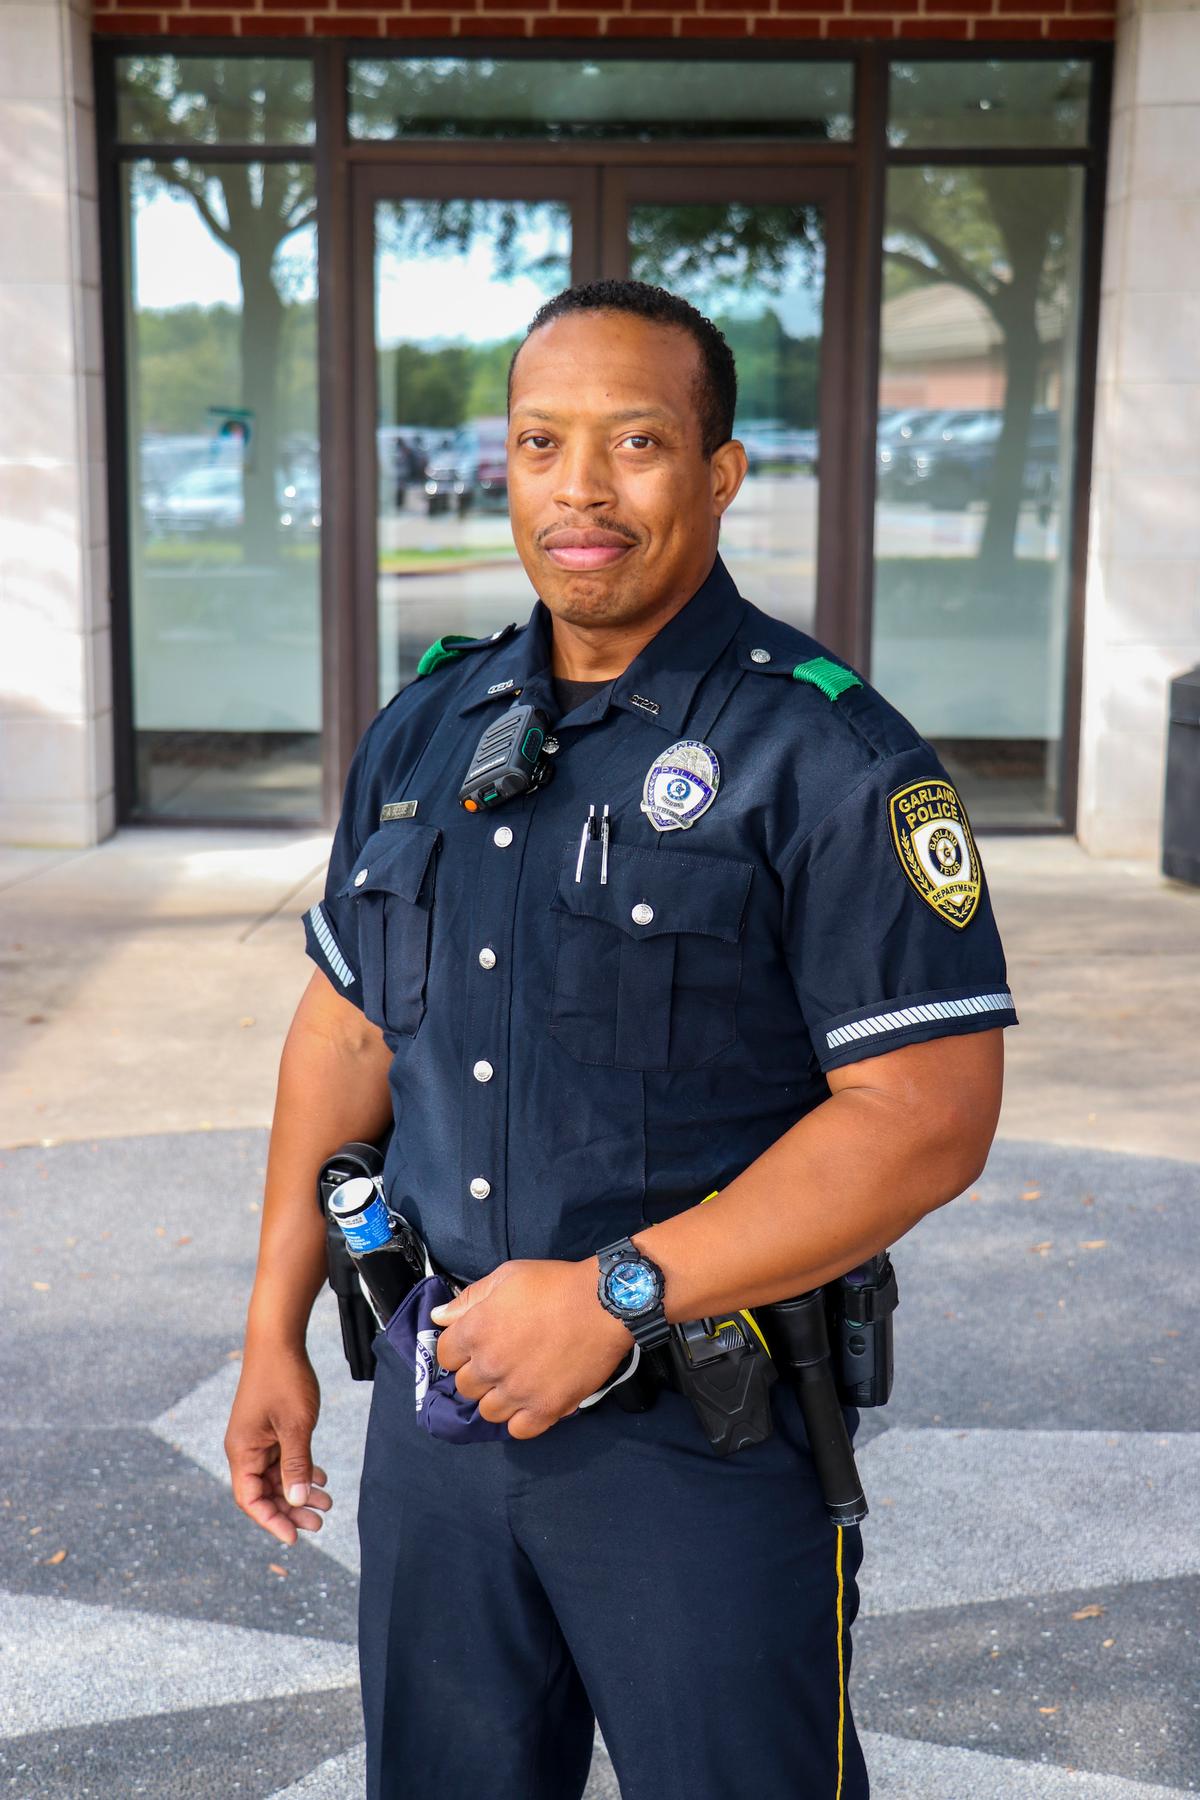 Police Officer Alton Reese of Garland, Texas. (Courtesy of <a href="http://www.garlandpolice.com/331/Police">Garland Police Department</a>)